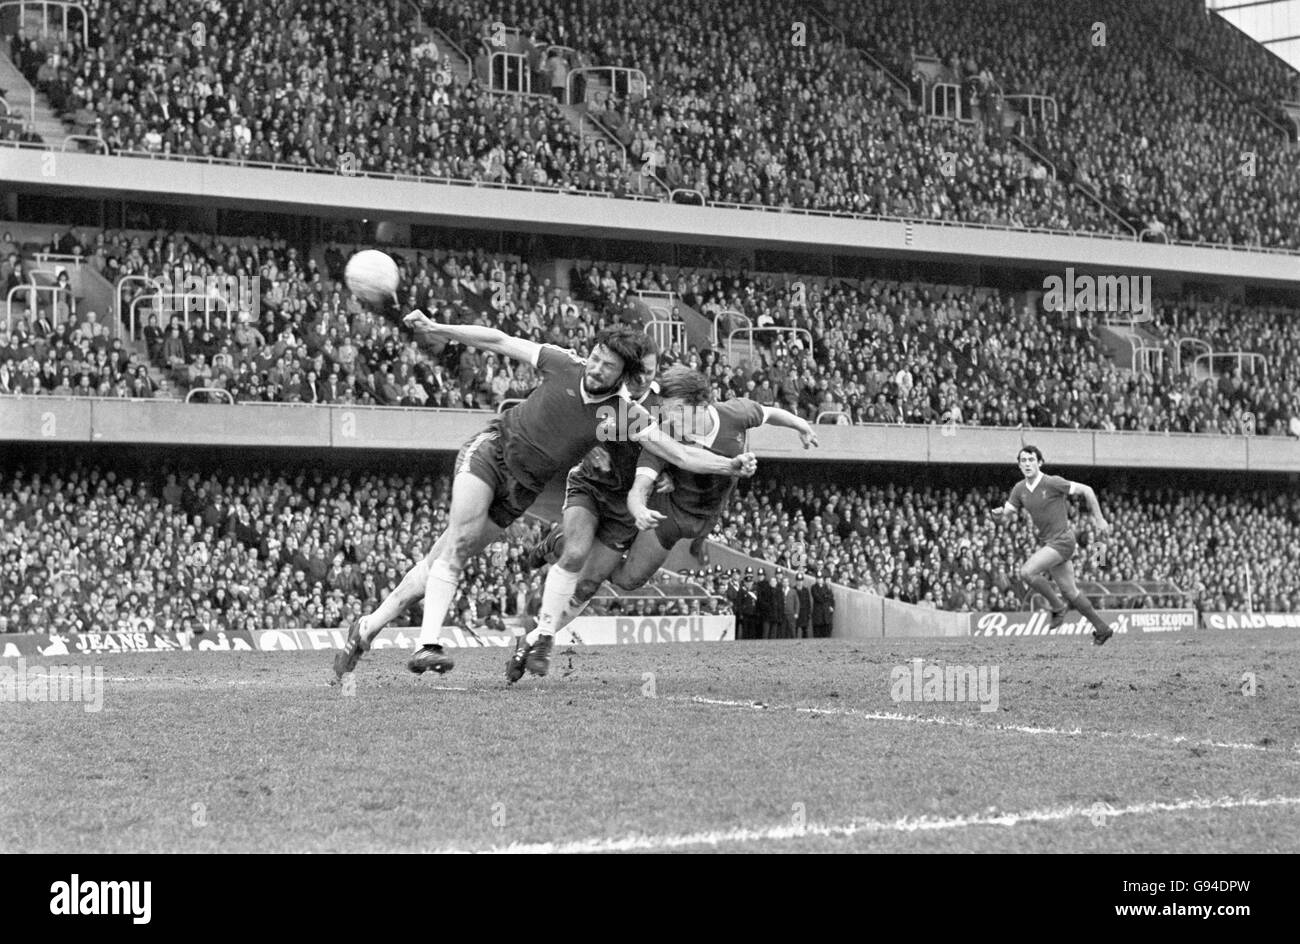 Soccer - Football League Division One - Chelsea v Liverpool - Stamford Bridge. Liverpool's Kenny Dalglish (r) beats Chelsea's Micky Droy (l) and Ron Harris (c) to direct a header goalwards Stock Photo